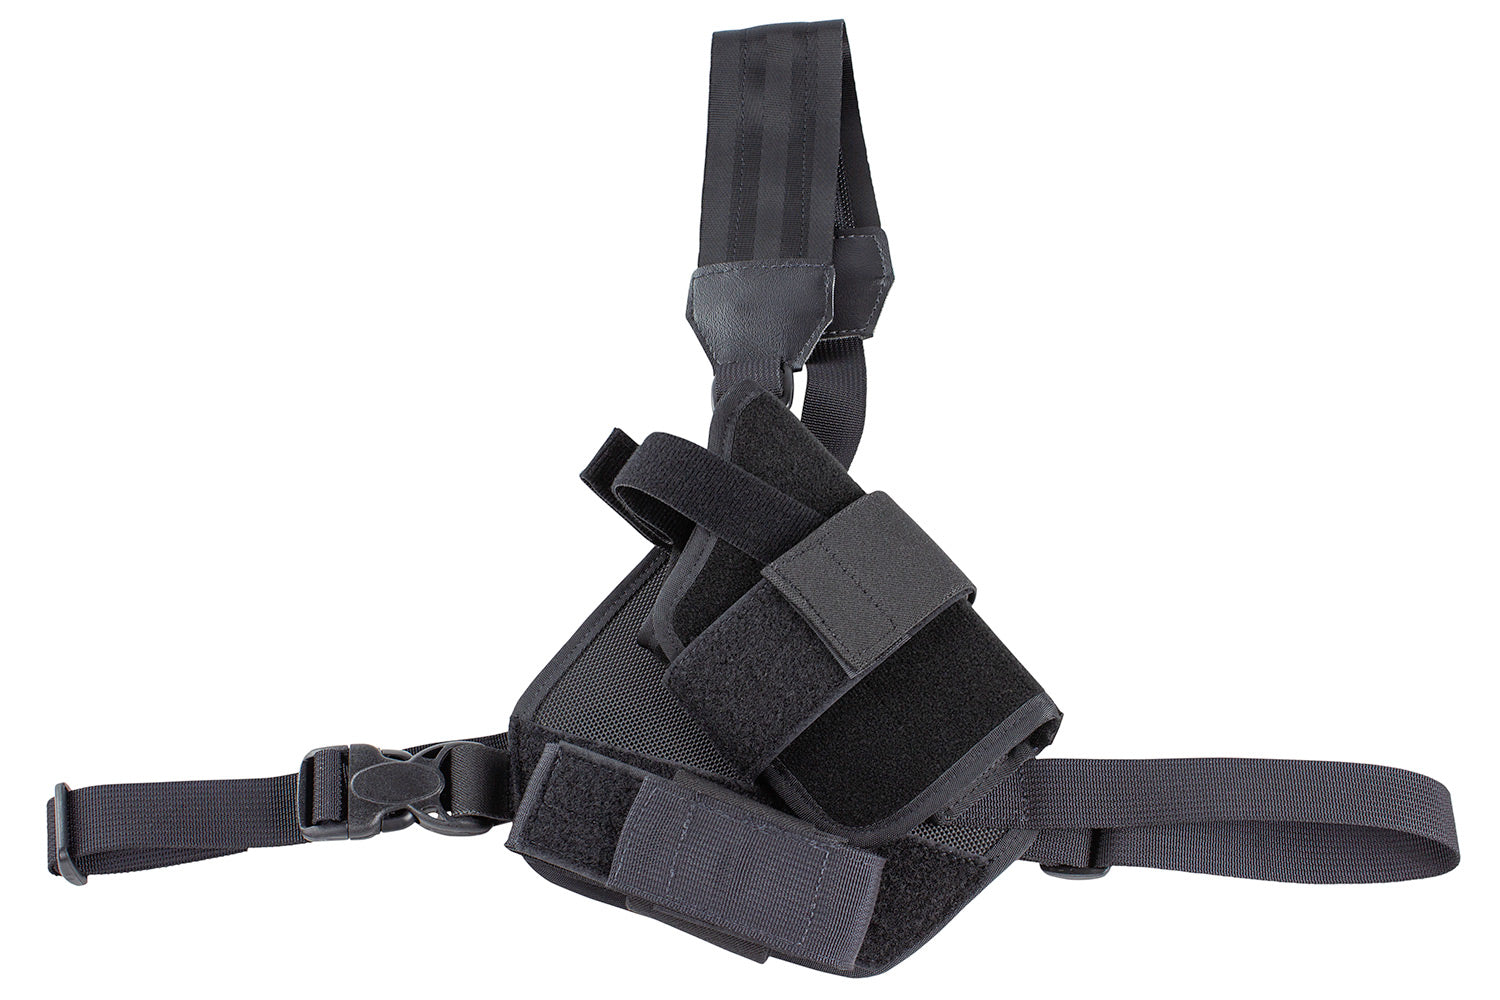 Trinidad Wolf Belly Band Gun Holster for Concealed Carry